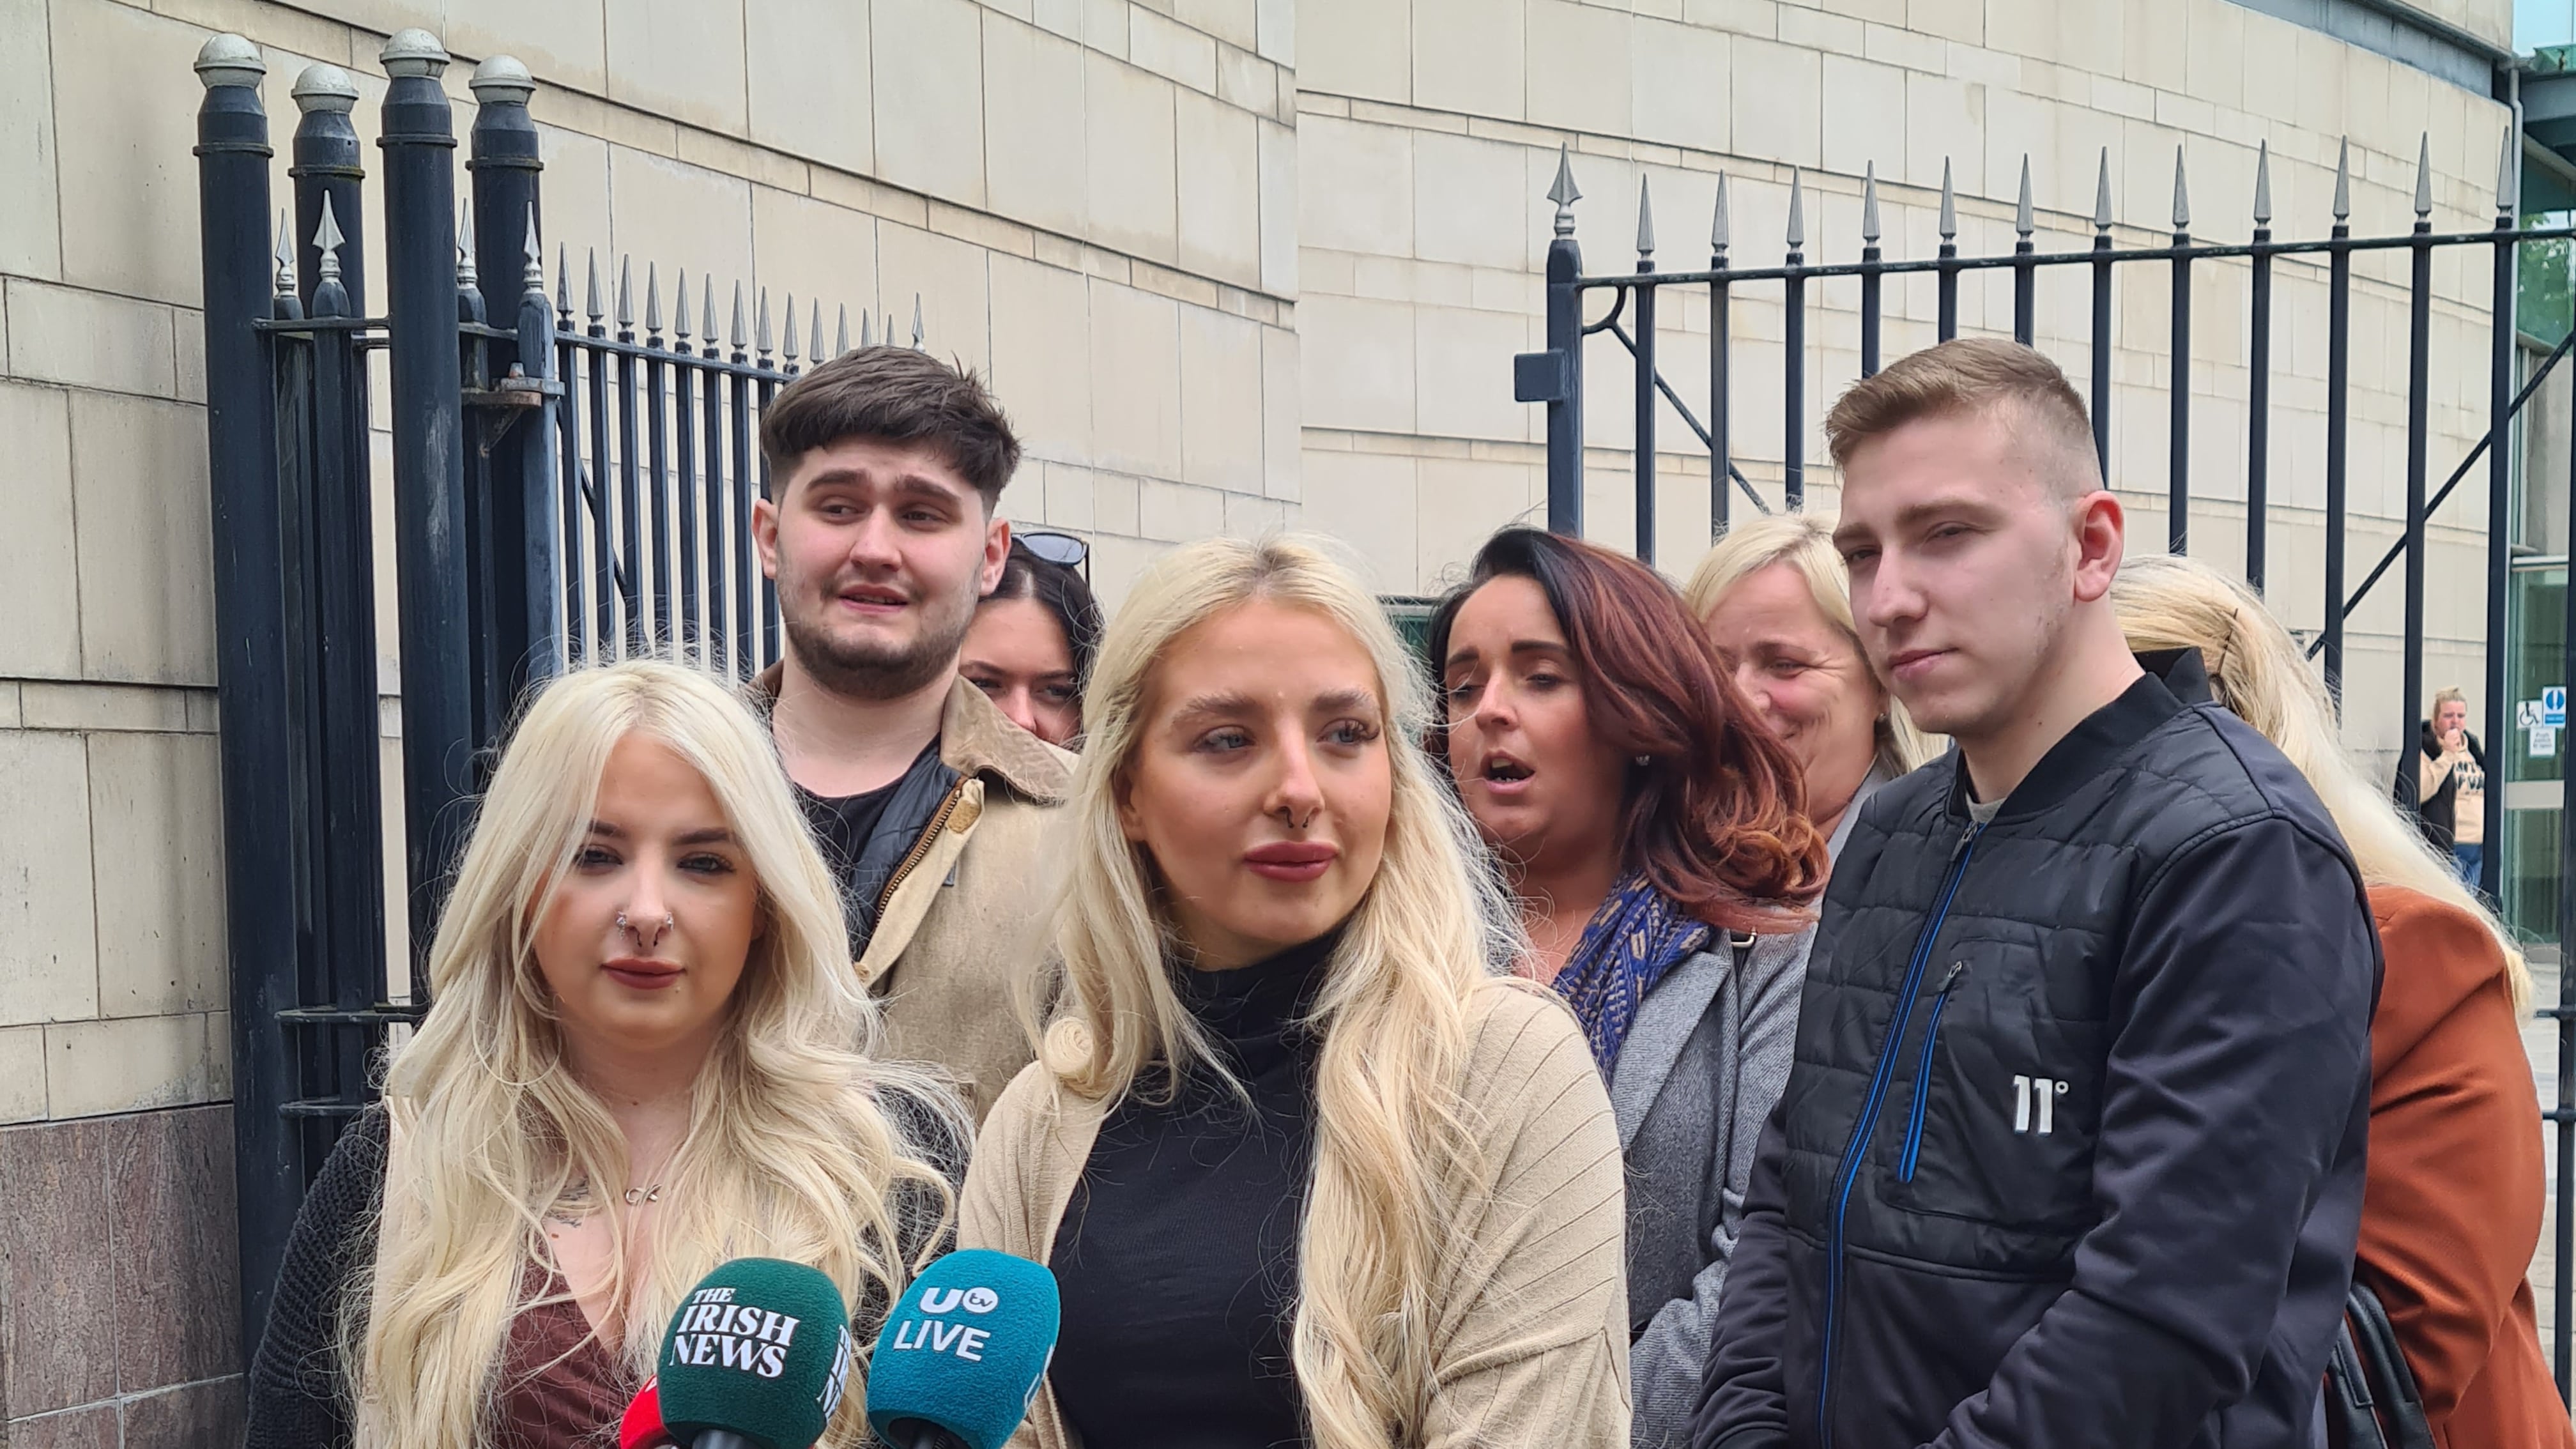 Mr Browne's daughters Bobbi-Leigh and Shannon McIlwaine said that "their lives have been destroyed"